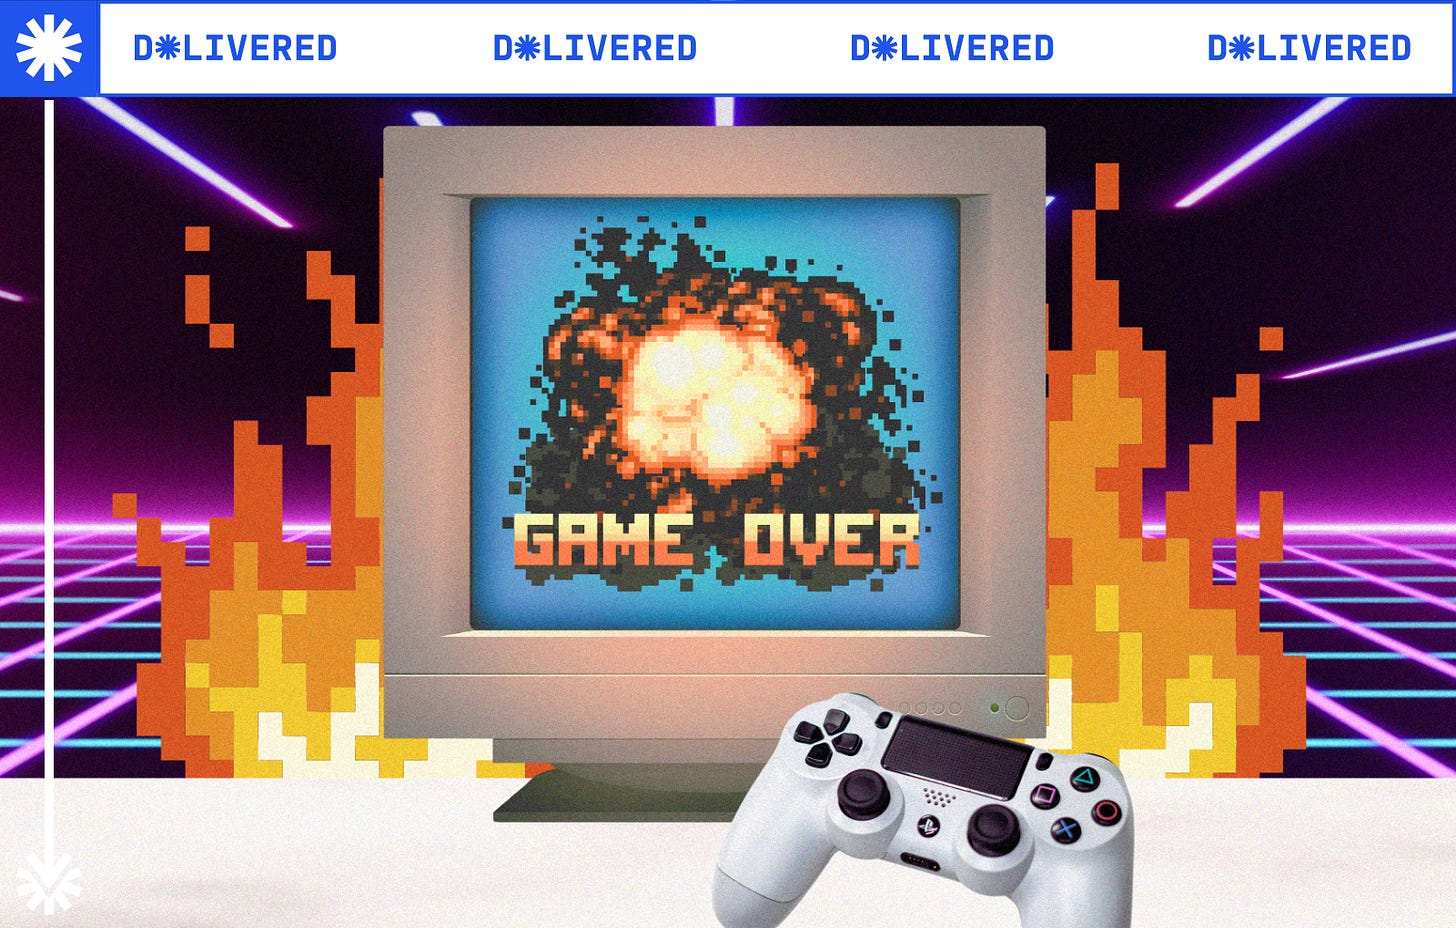 An old school-style video game reads 'Game over' on a screen with explosions in the back, and a Playstation controller in the foreground.